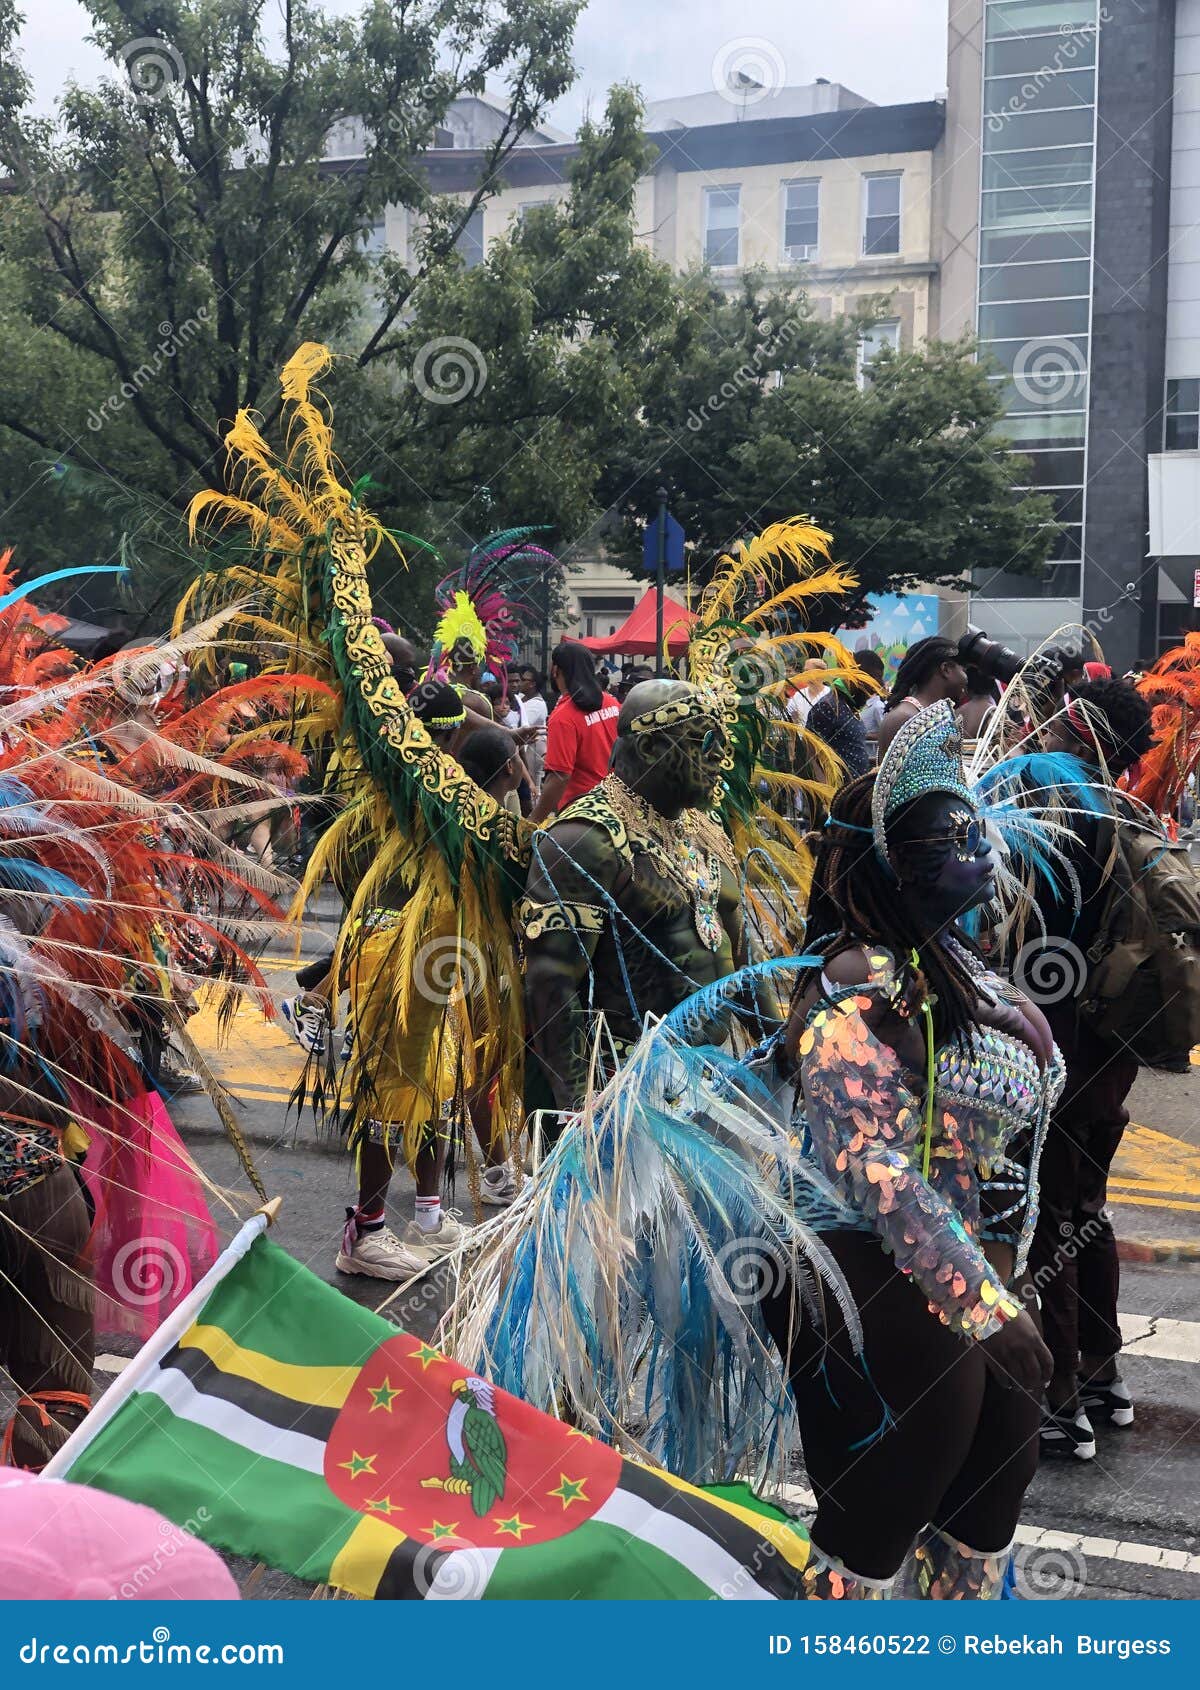 Annual Caribbean Day Parade, Carnival, New York City Editorial